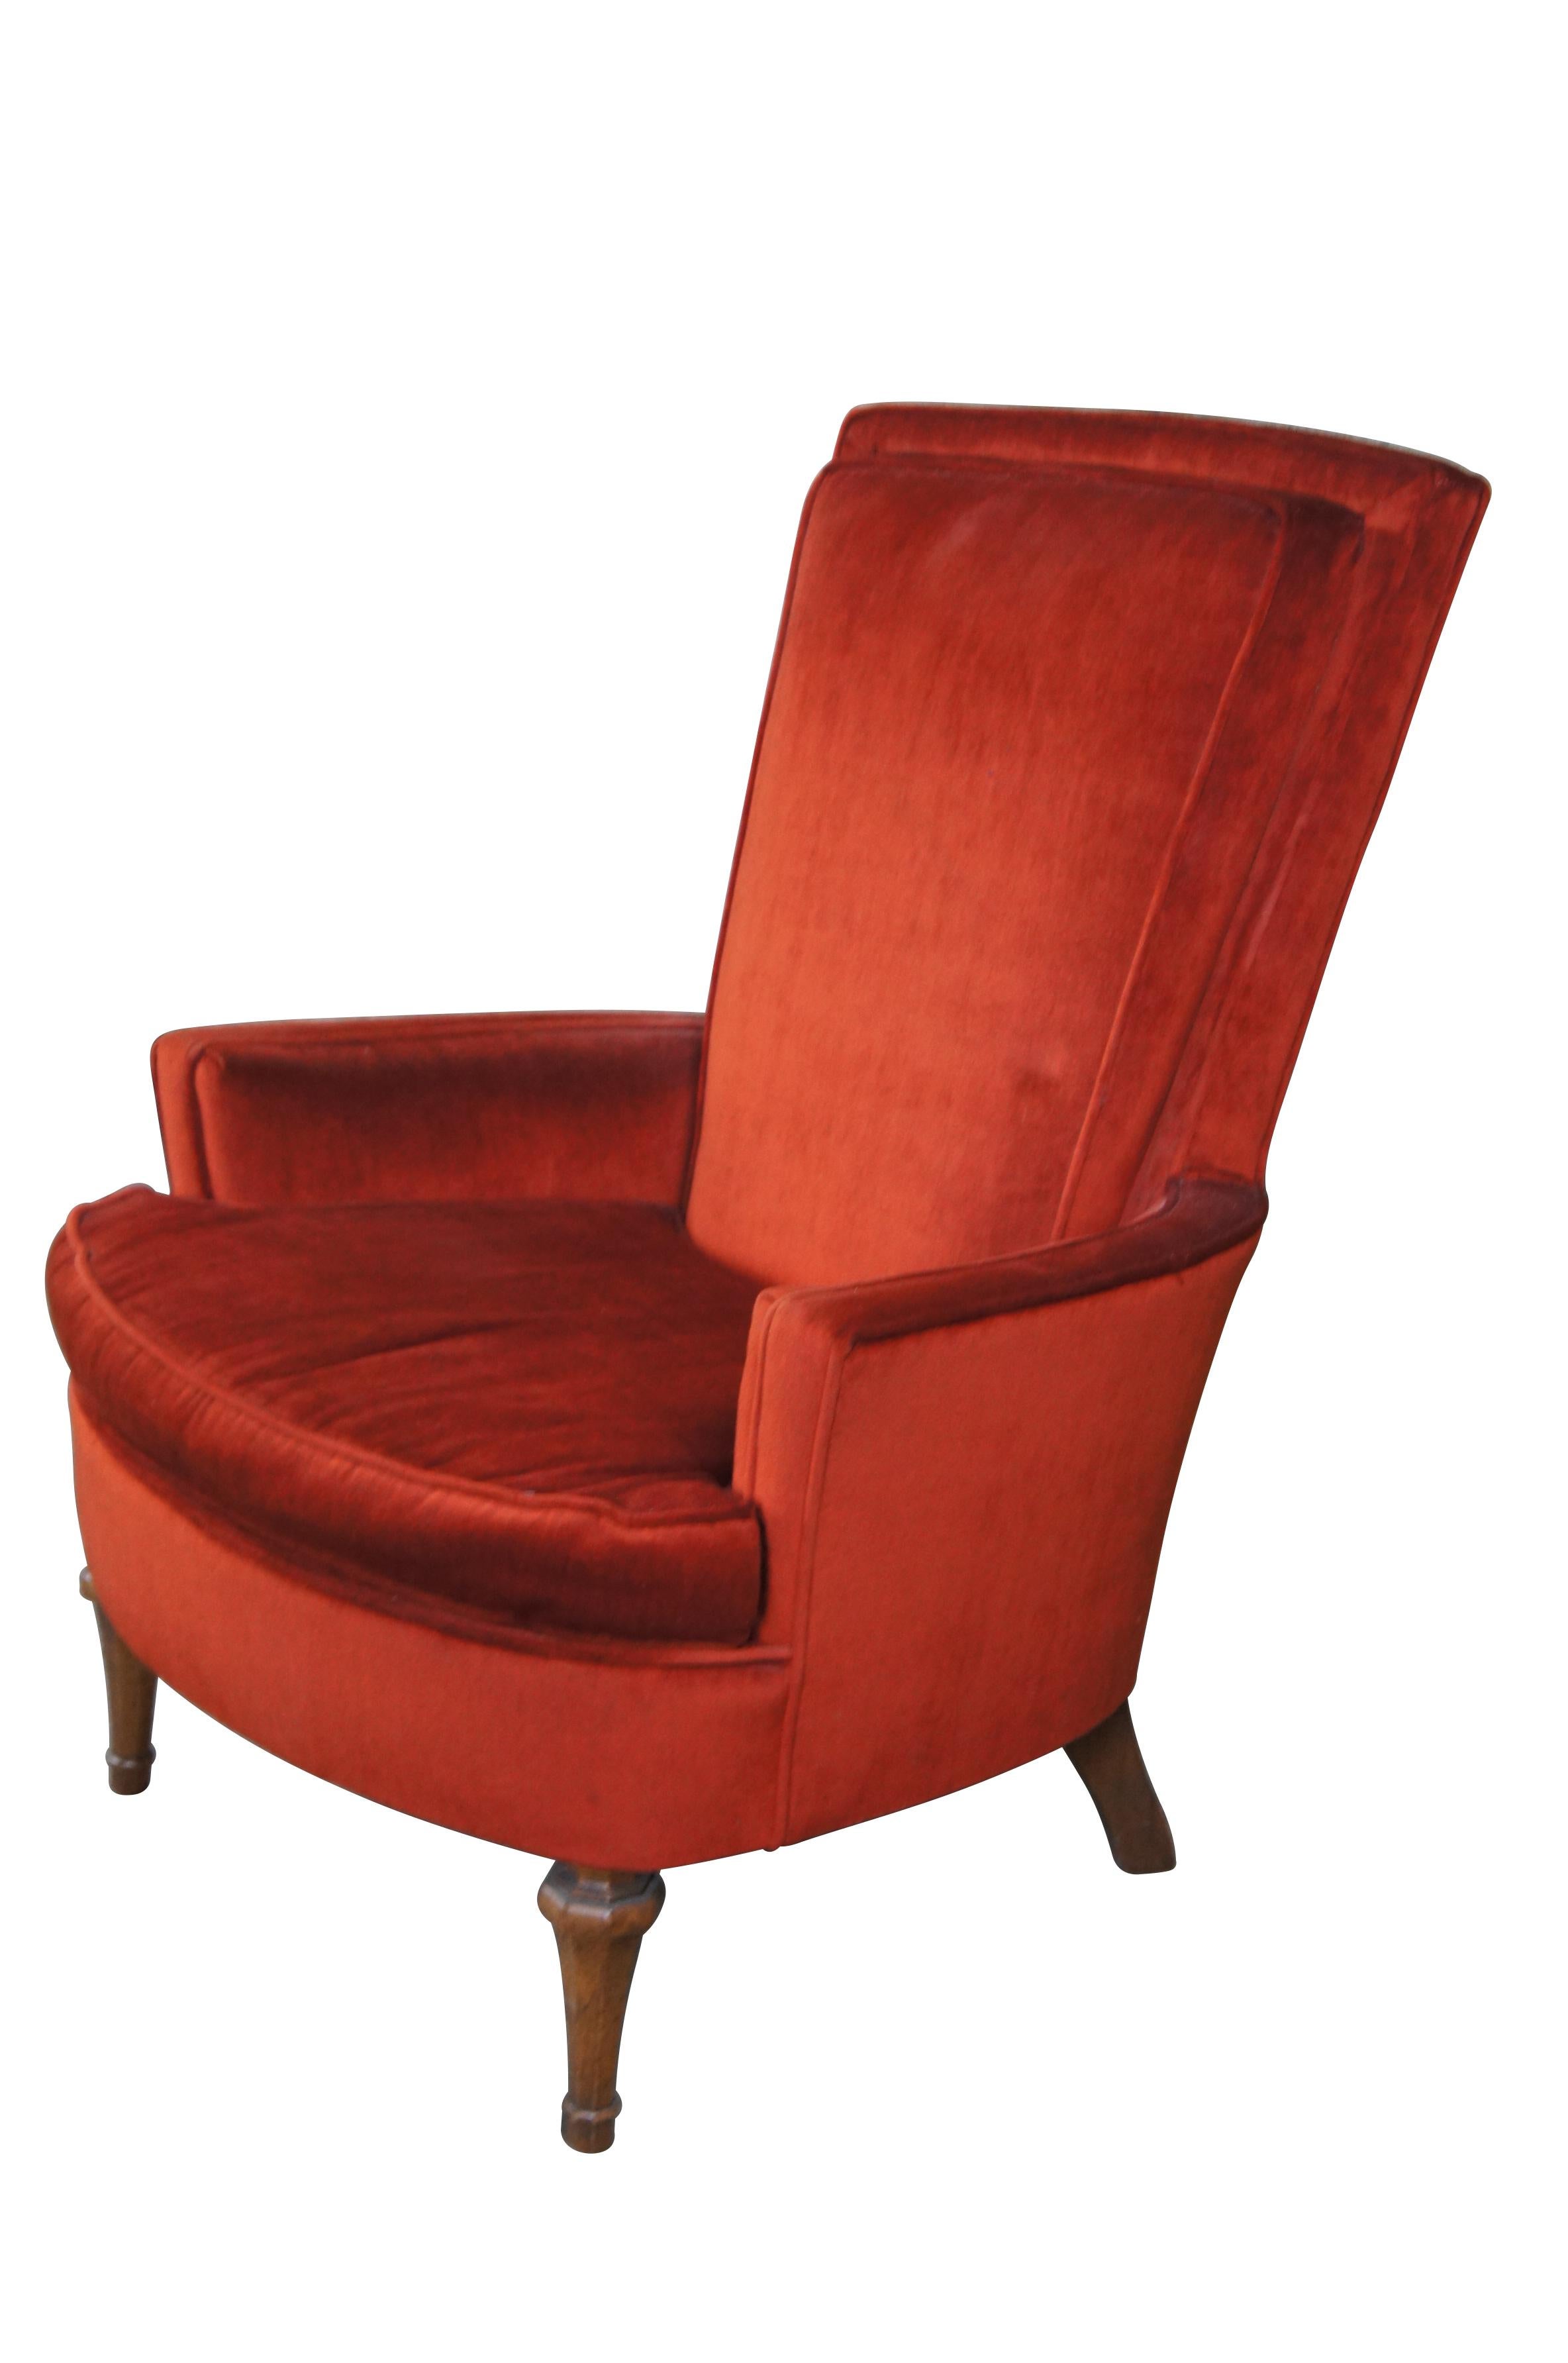 Red velvet highback lounge chair.  Features a high padded back and low arms over distressed walnut turned feet.  

Dimensions:
30.5